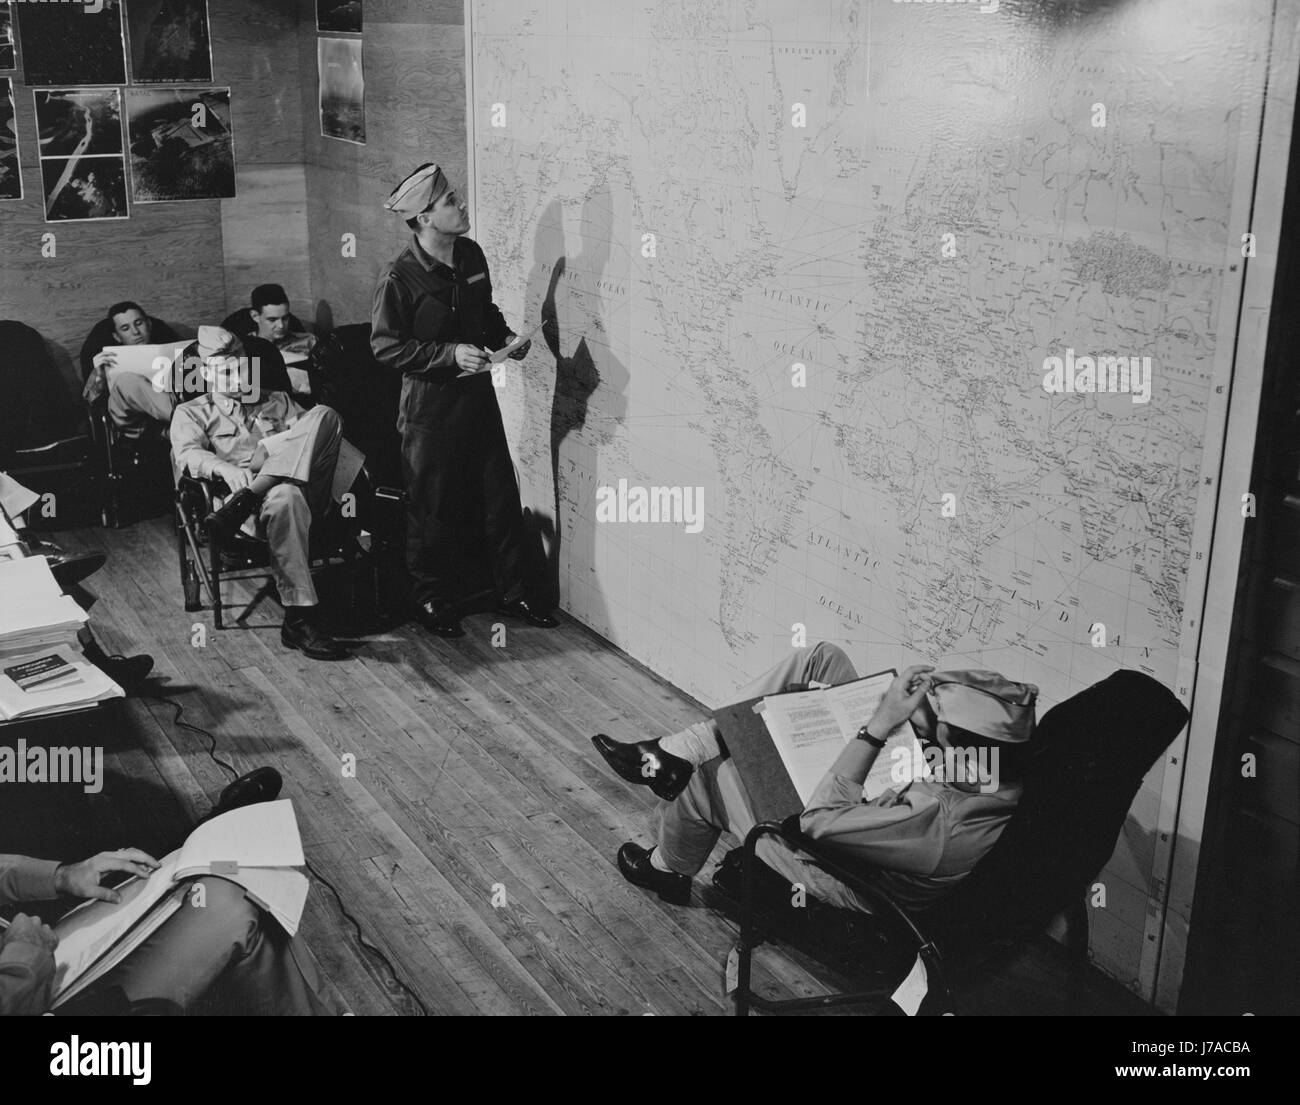 Pilots of the United States Army air transport command studying a map, 1943. Stock Photo